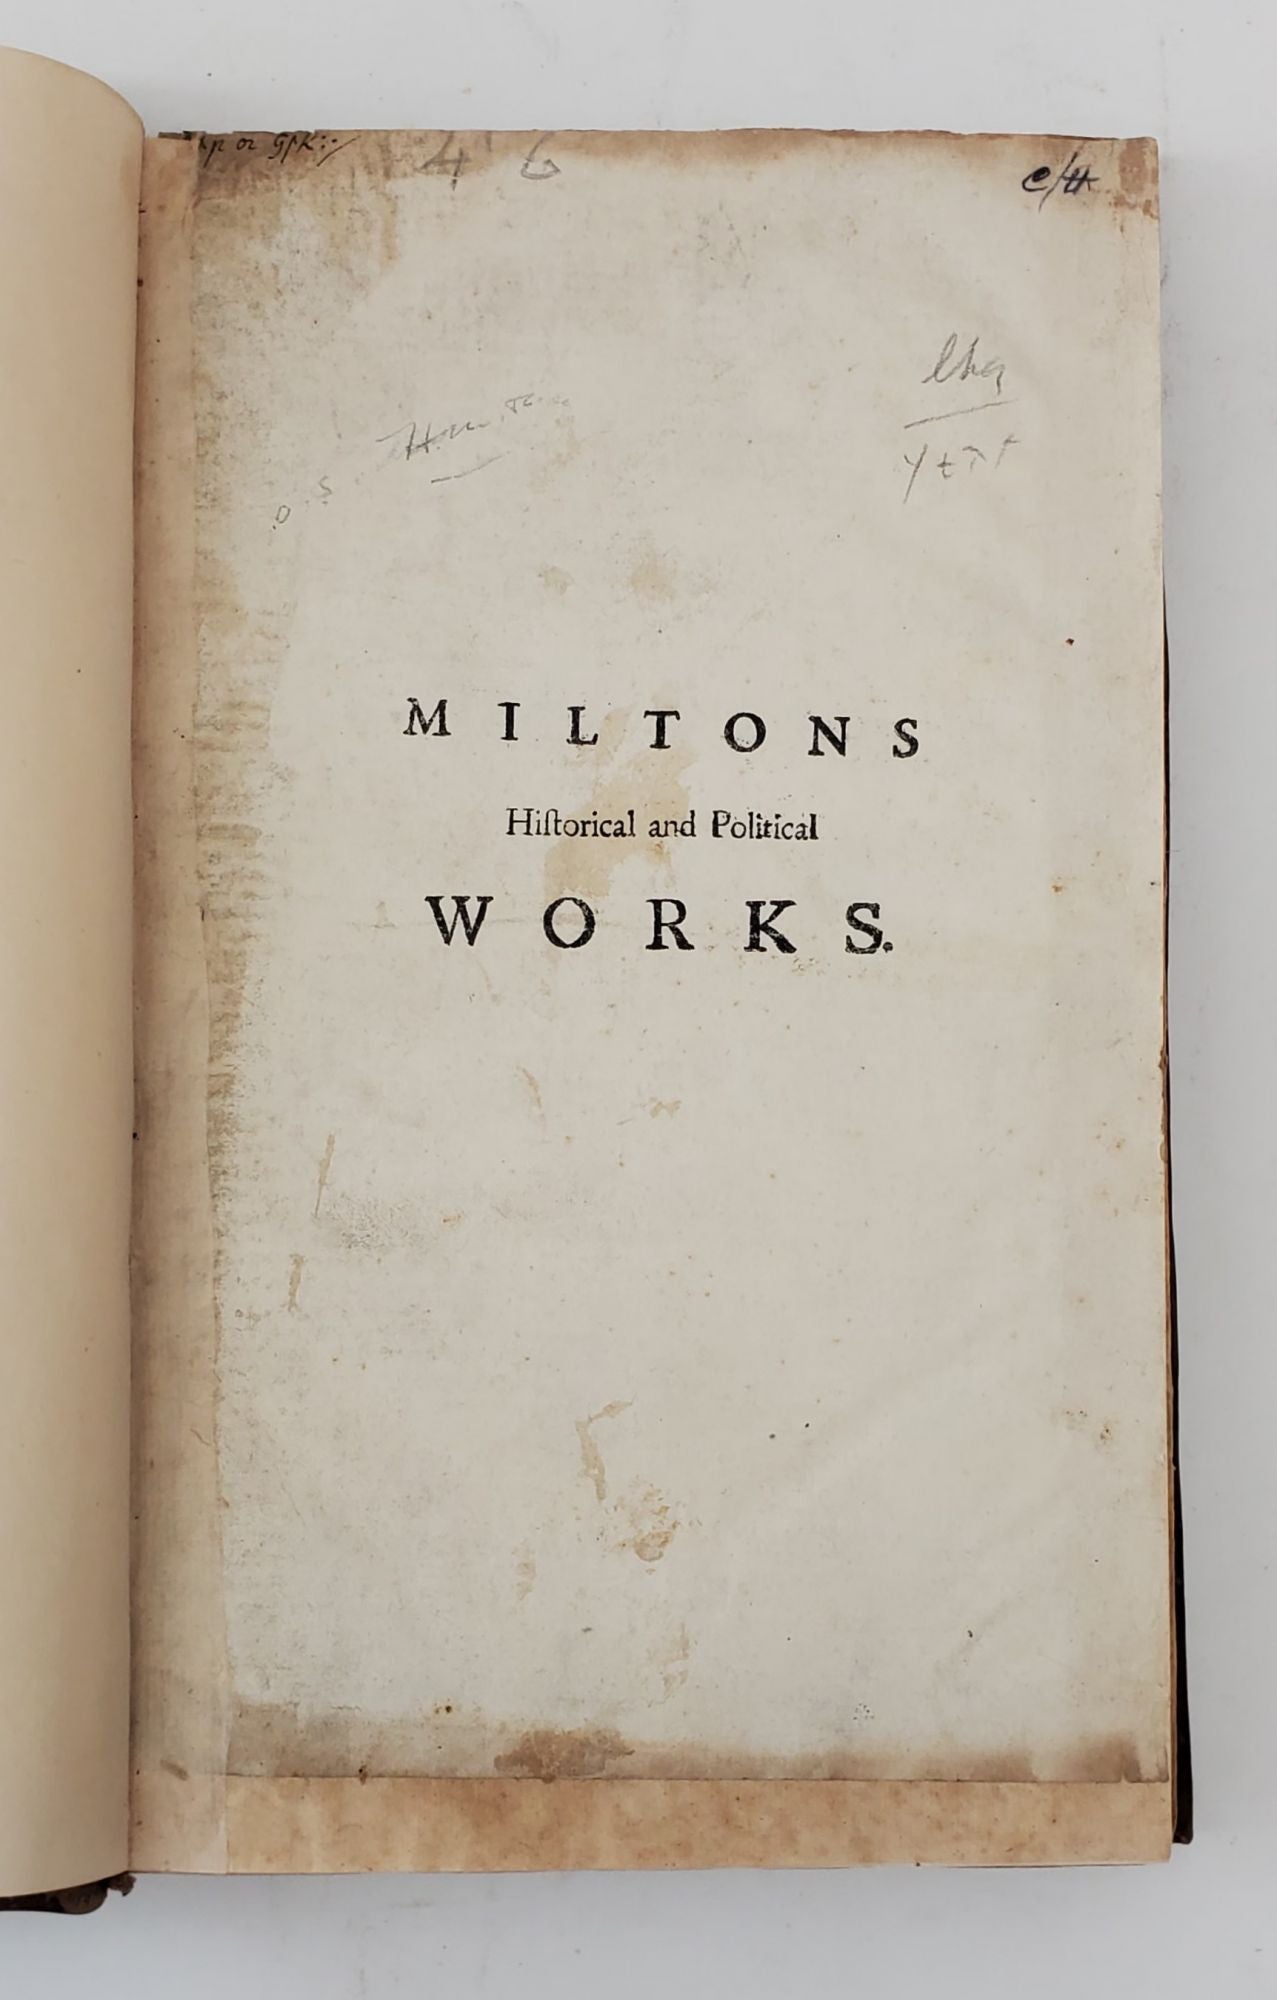 Product Image for A COMPLETE COLLECTION OF THE HISTORICAL, POLITICAL, AND MISCELLANEOUS WORKS OF JOHN MILTON, BOTH ENGLISH AND LATIN [Volume Two Only]